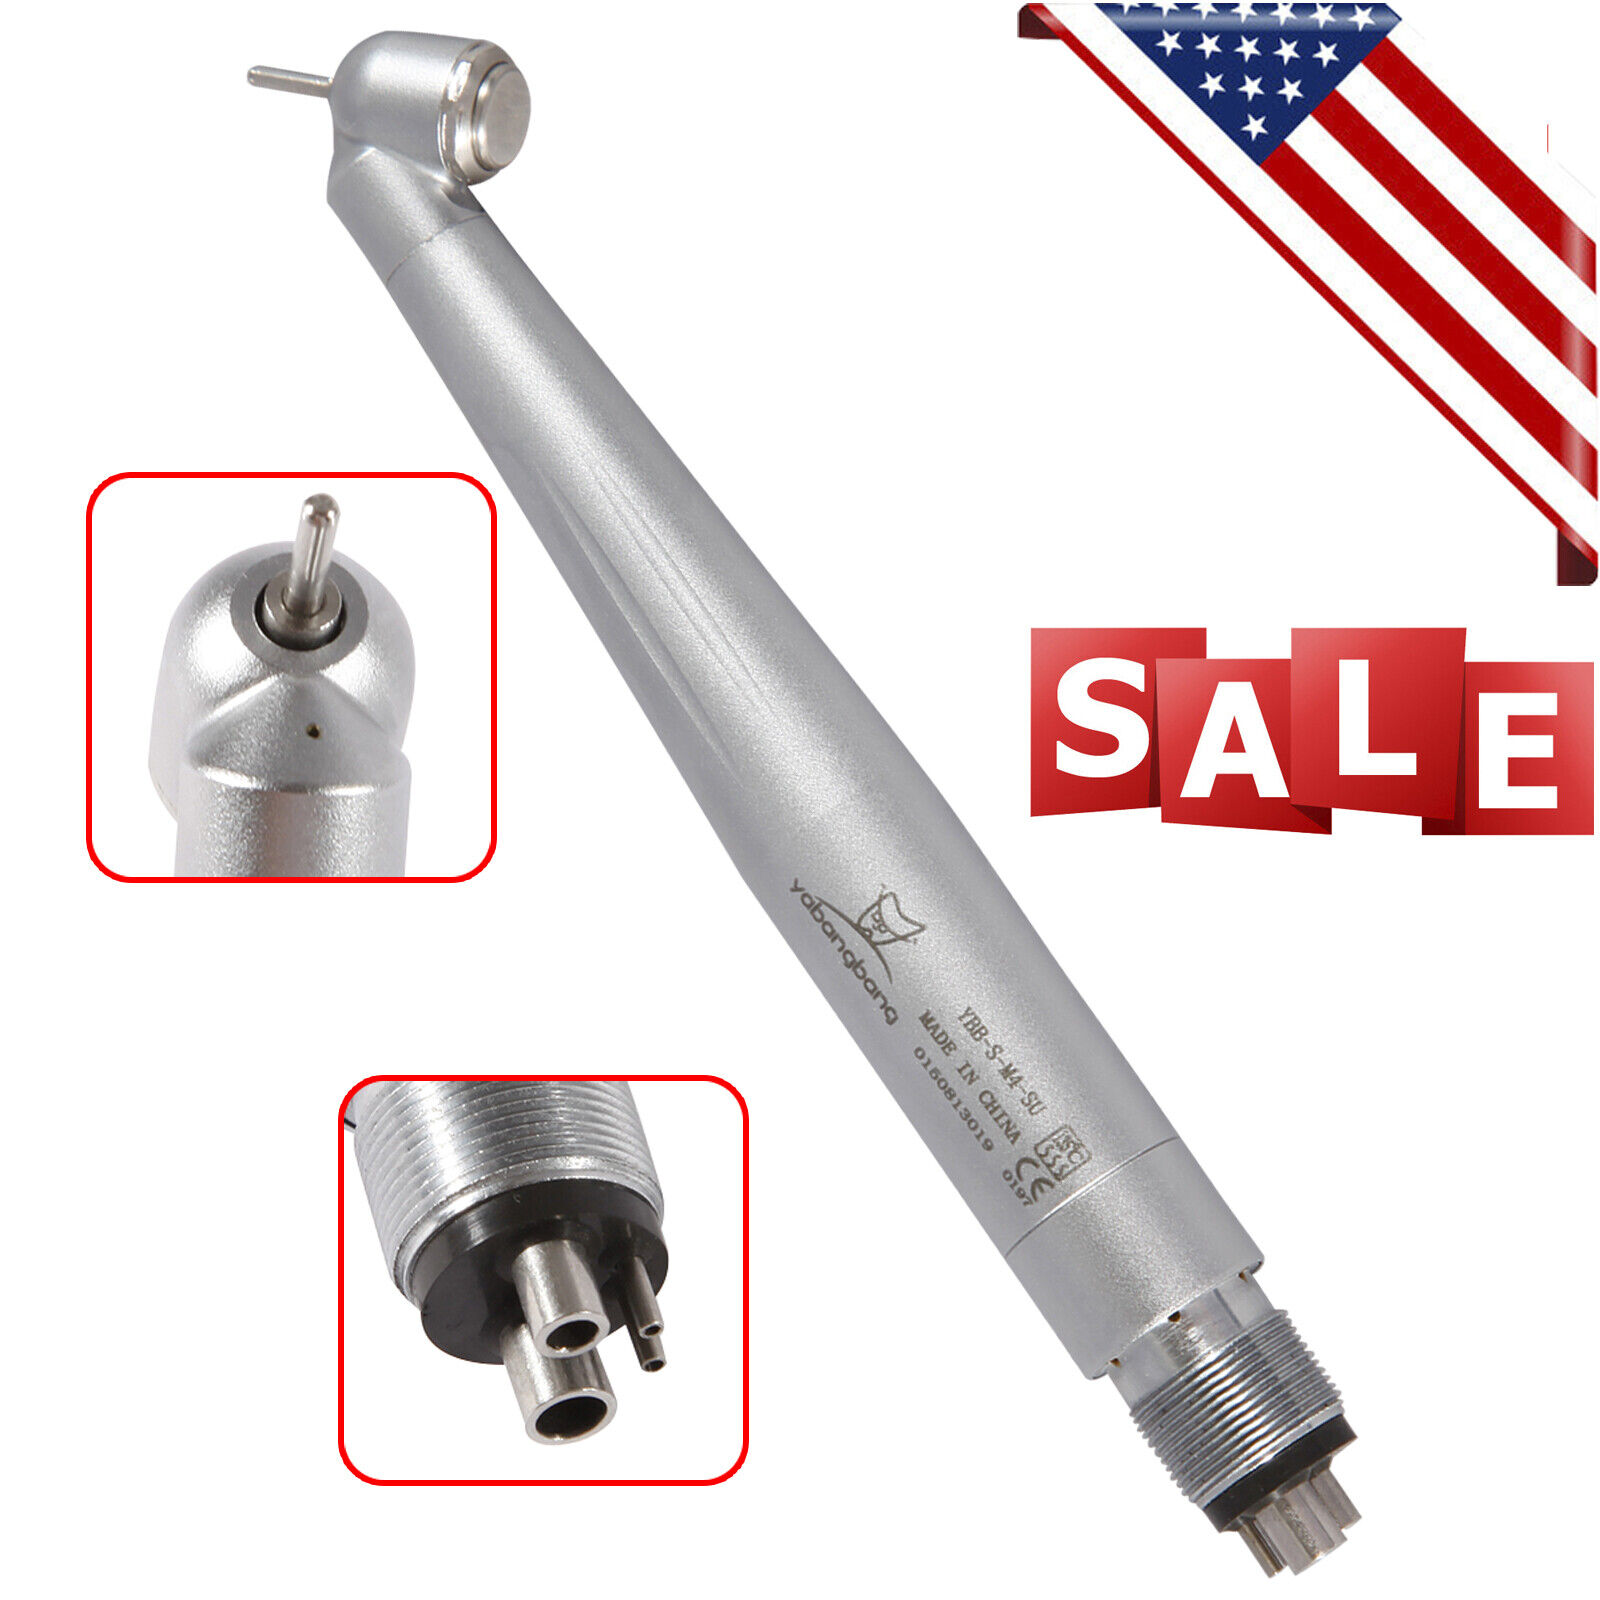 NSK Style Dental 45 Degree Surgical High Speed Handpiece Push Button 4Hole WCA4